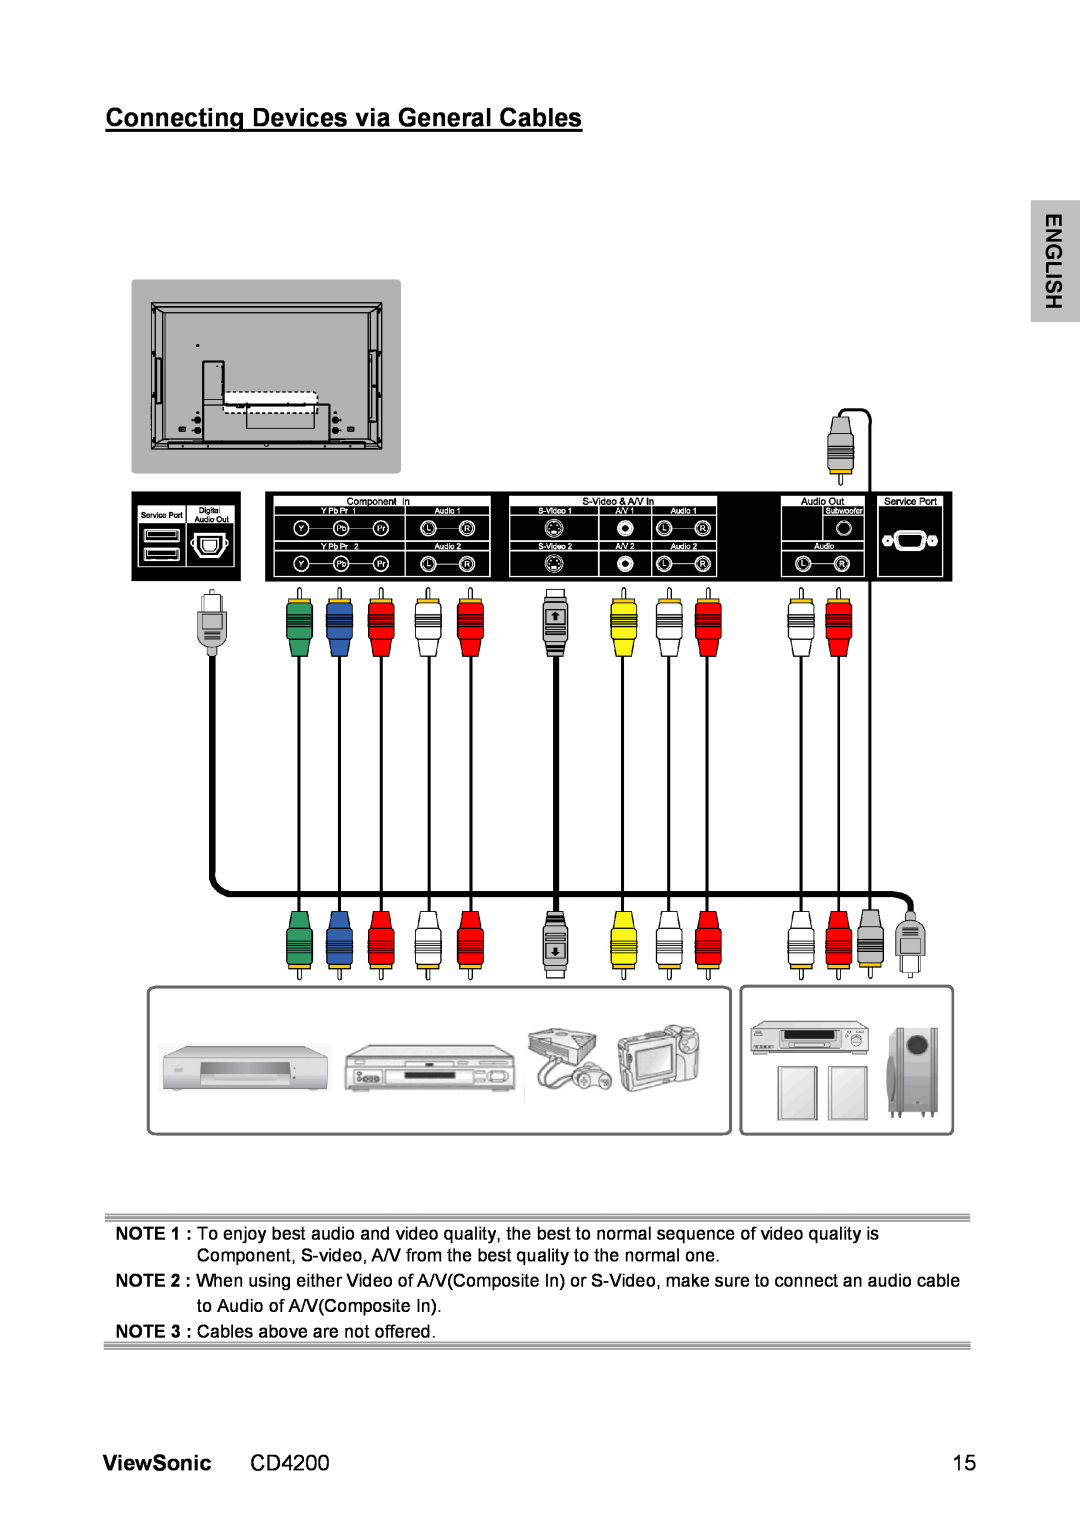 ViewSonic manual Connecting Devices via General Cables, English, ViewSonic CD4200 